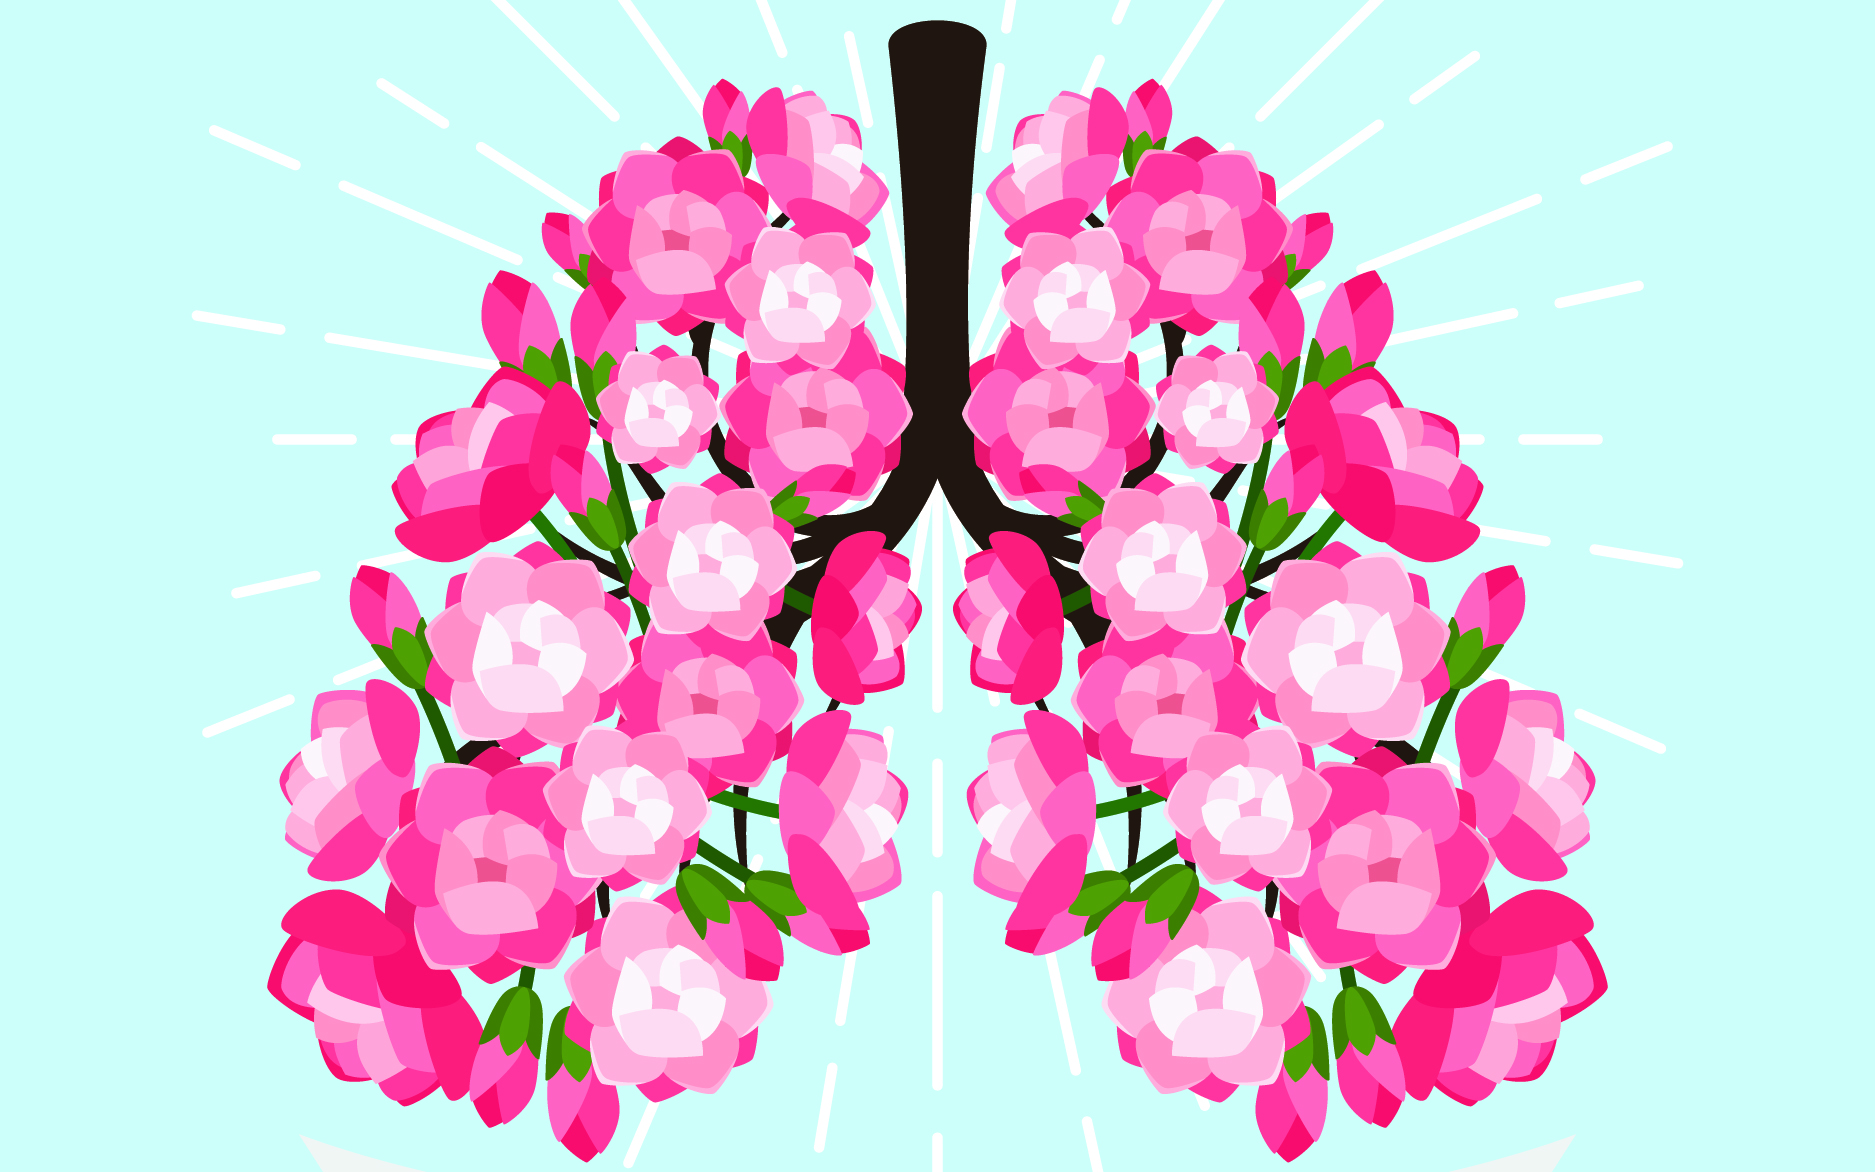 Blooming lungs - meditation begins with the breath